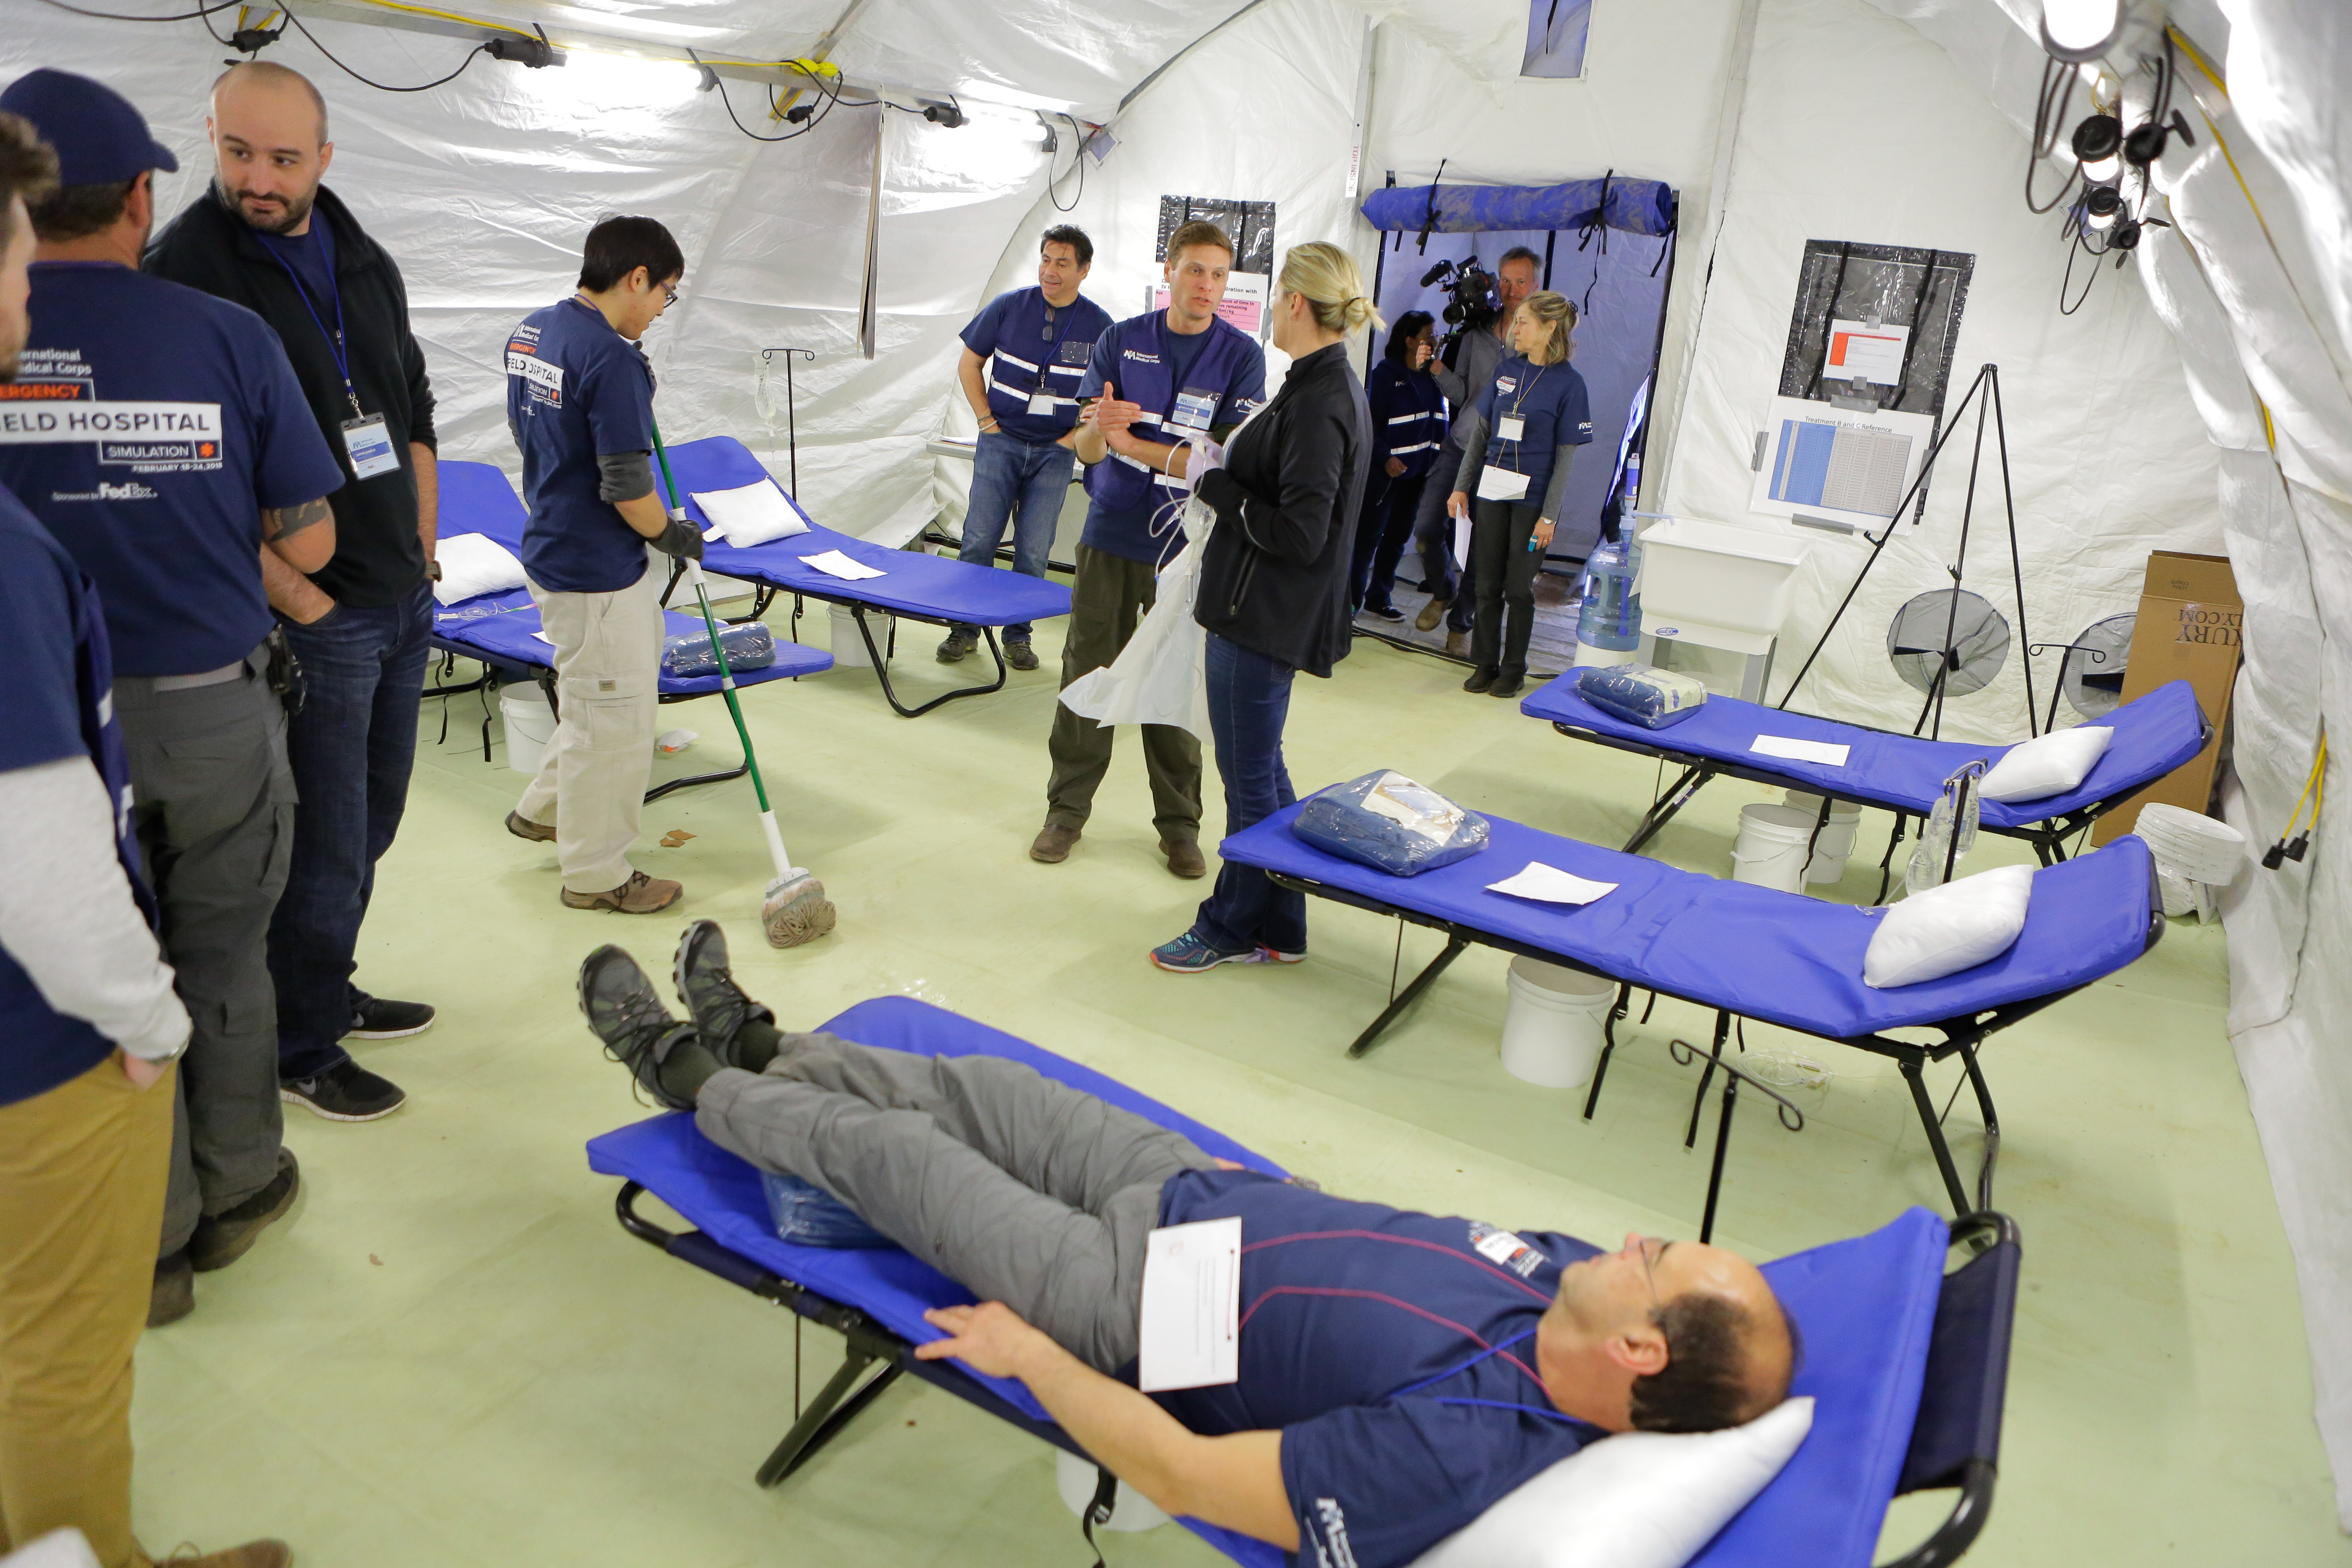 Simulation participants inside the Field hospital